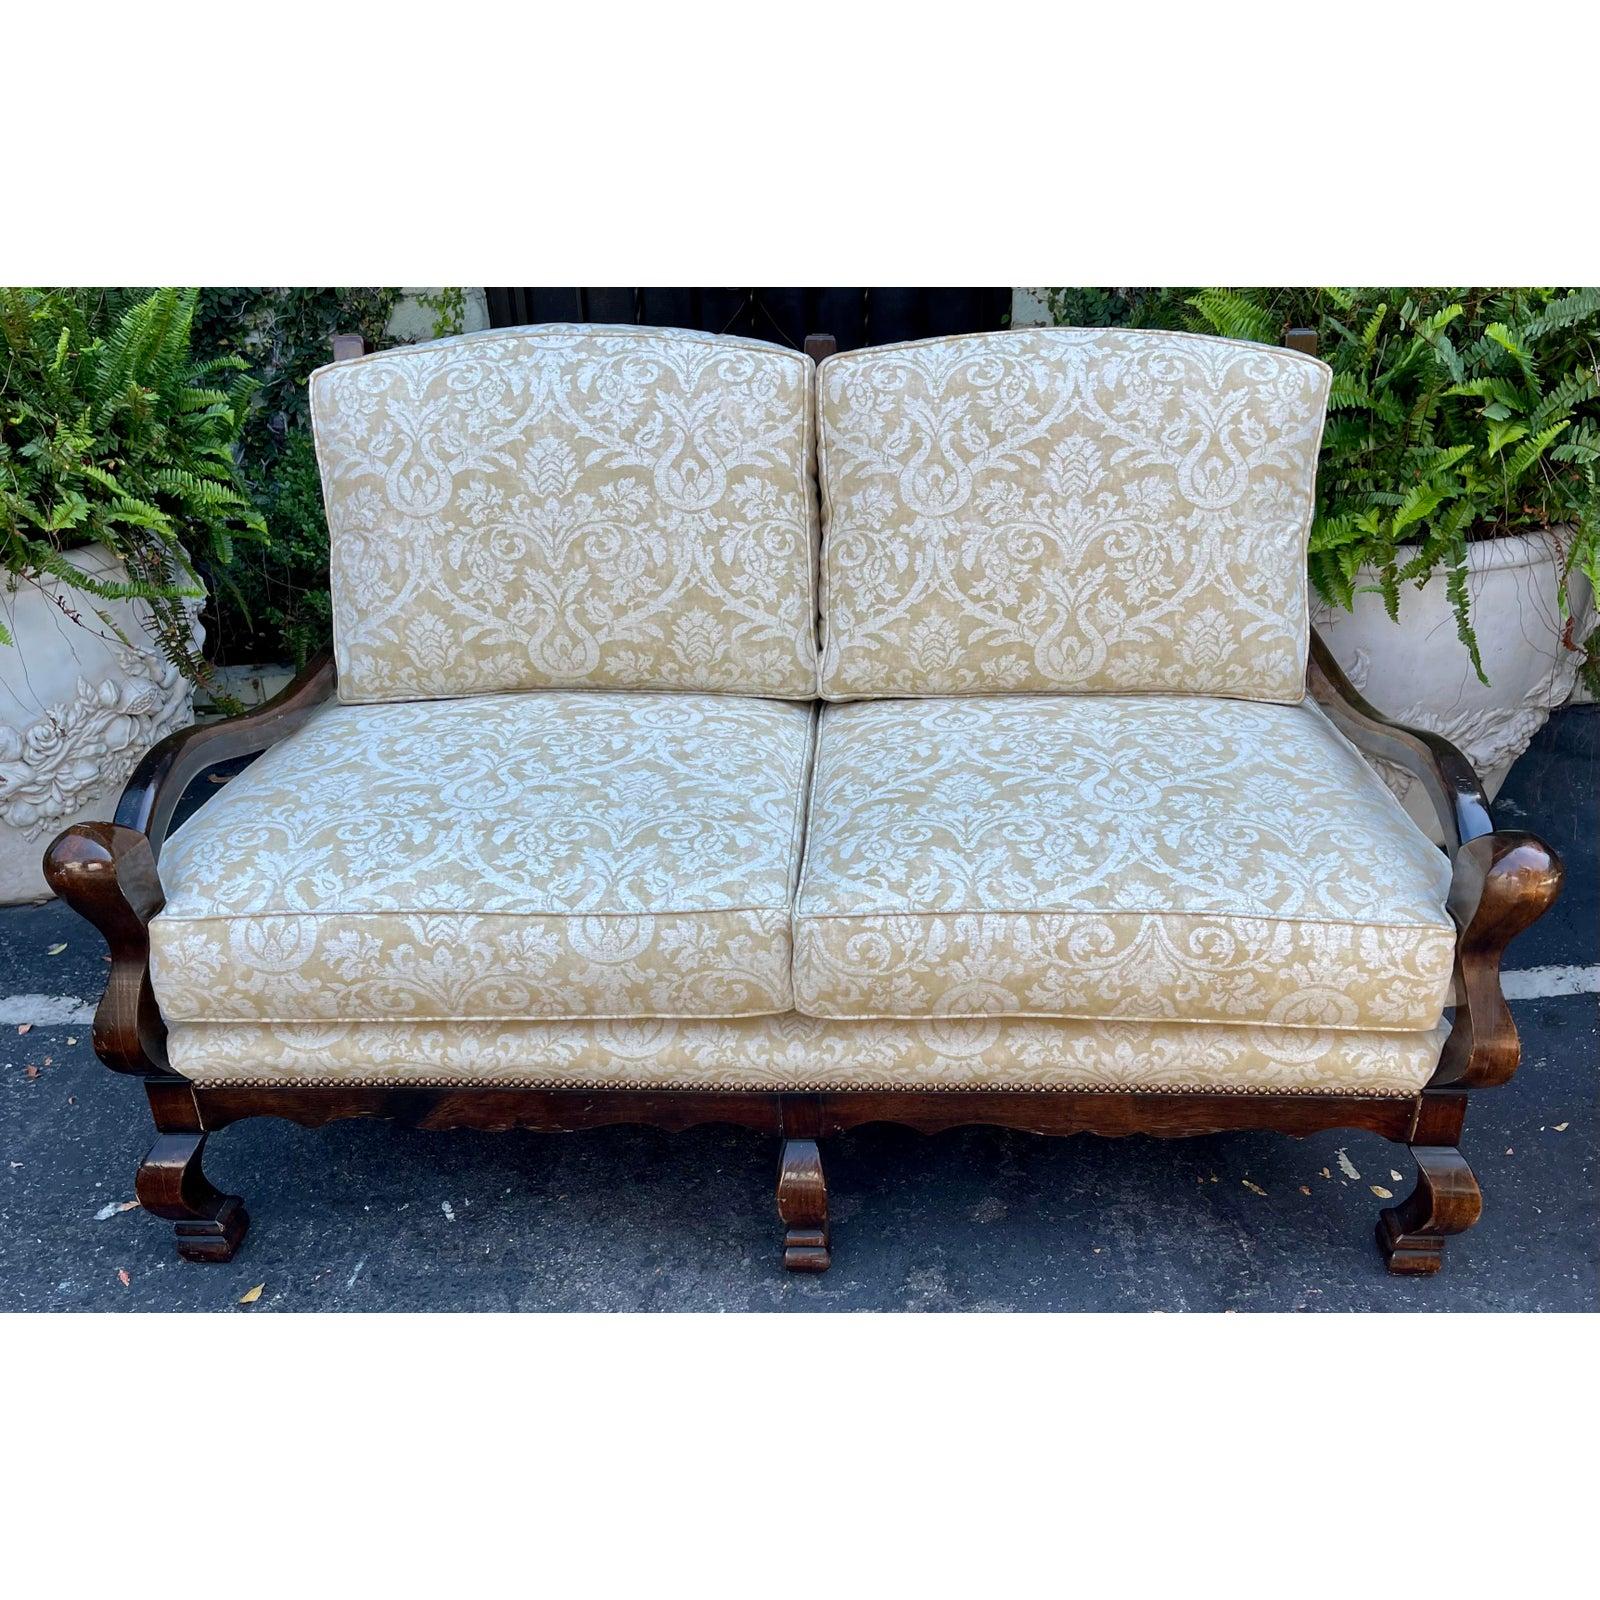 Cal-Mode Rustic Dark Oak French Country Down Filled Settee Sofa

Additional information:
Materials: Feather
Color: Beige
Brand: Cal-mode
Designer: Cal-Mode
Period: 1970’s
Styles: French Country, Italian, Rustic
Number of Seats: 2
Item Type: Vintage,